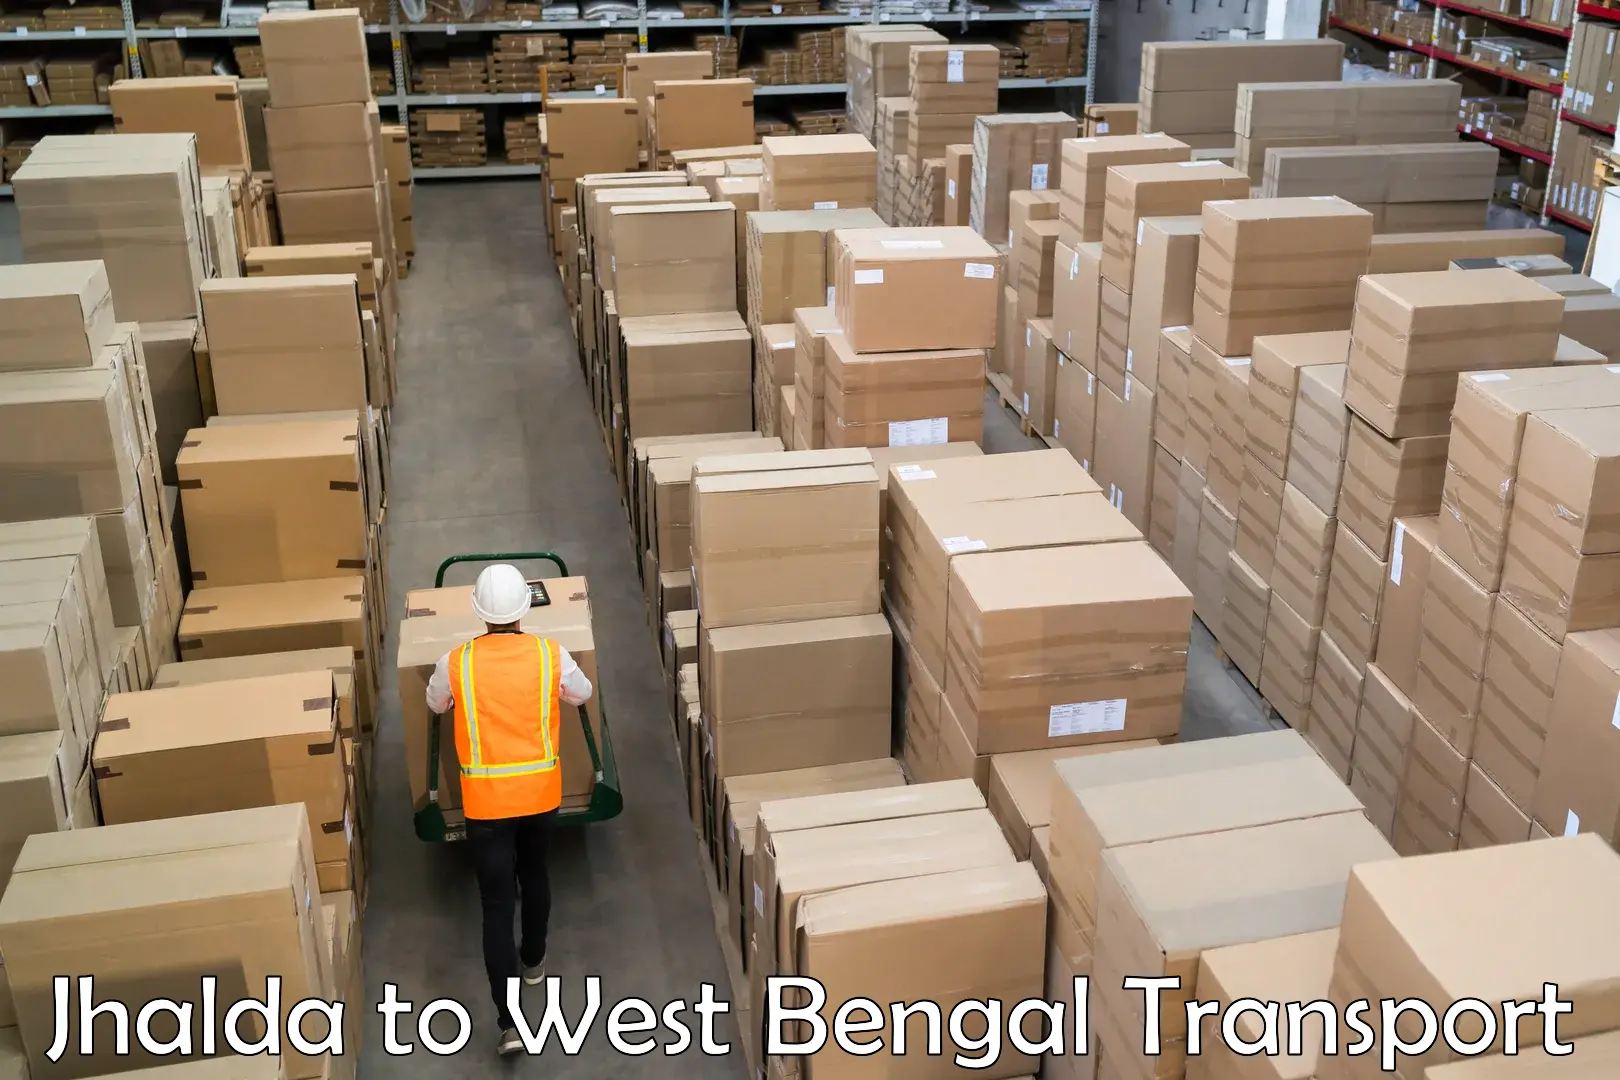 Air freight transport services in Jhalda to Bagdogra